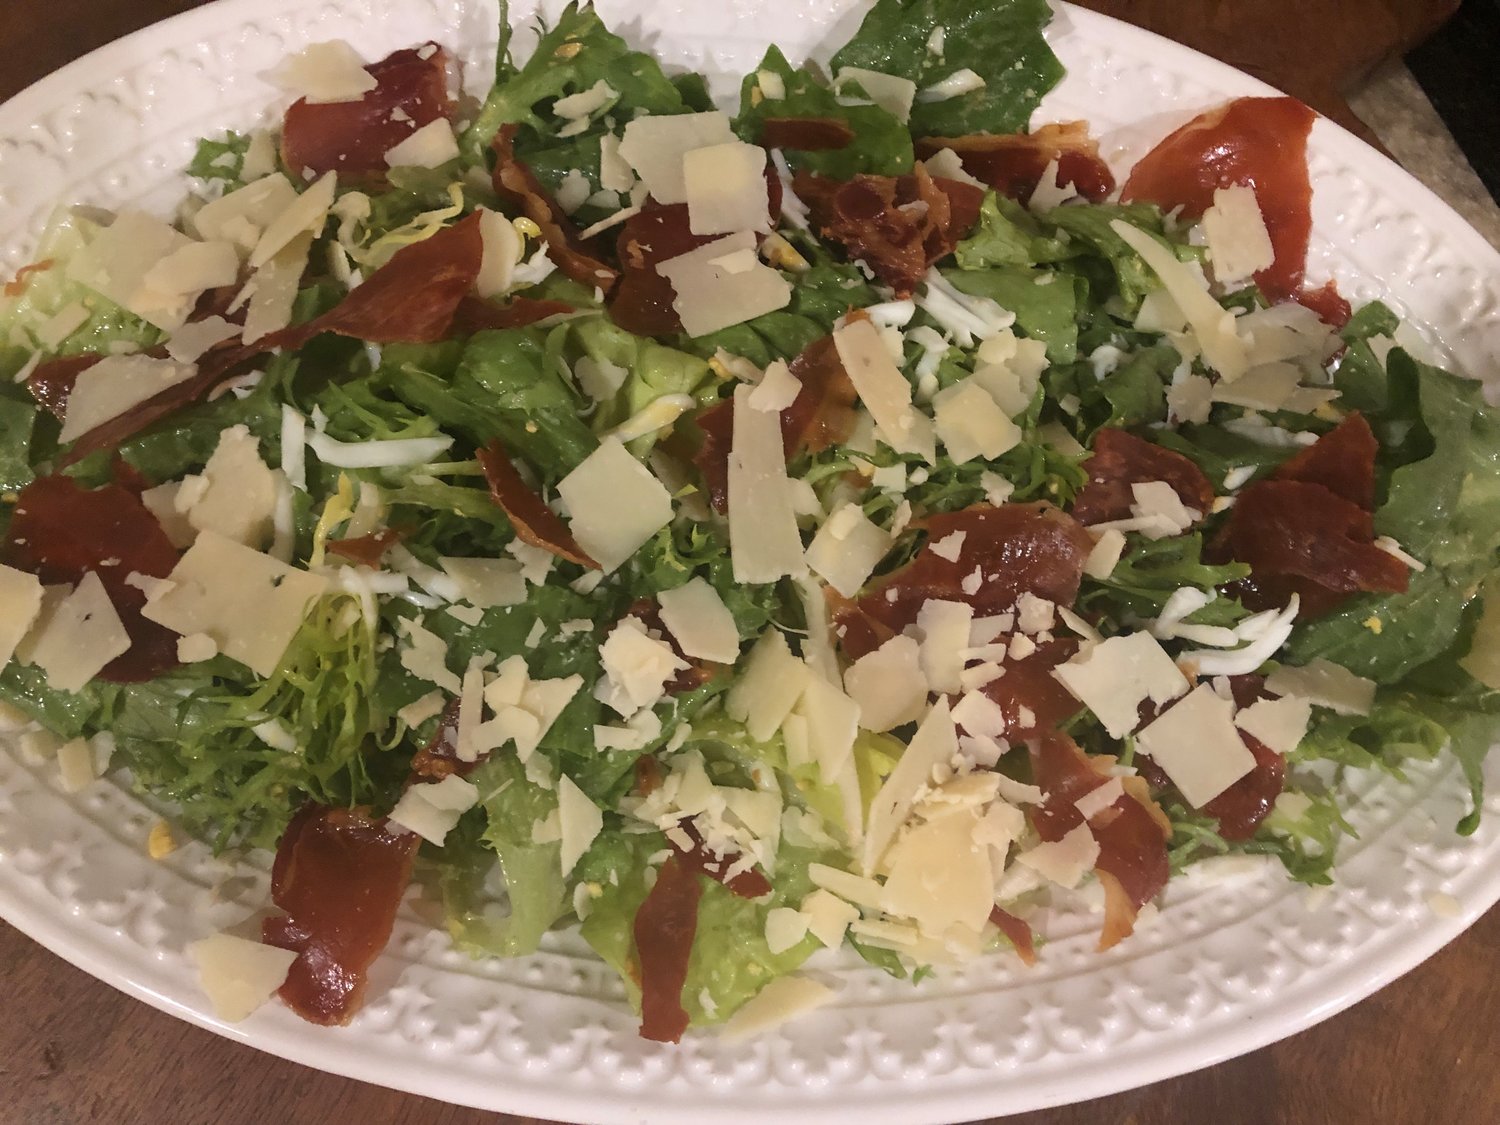 The star of this dish is the thinly-sliced prosciutto, crisped up in the oven and tossed with escarole in a lemon-anchovy vinaigrette and garnished with shards of Parmigiano-Reggiano.